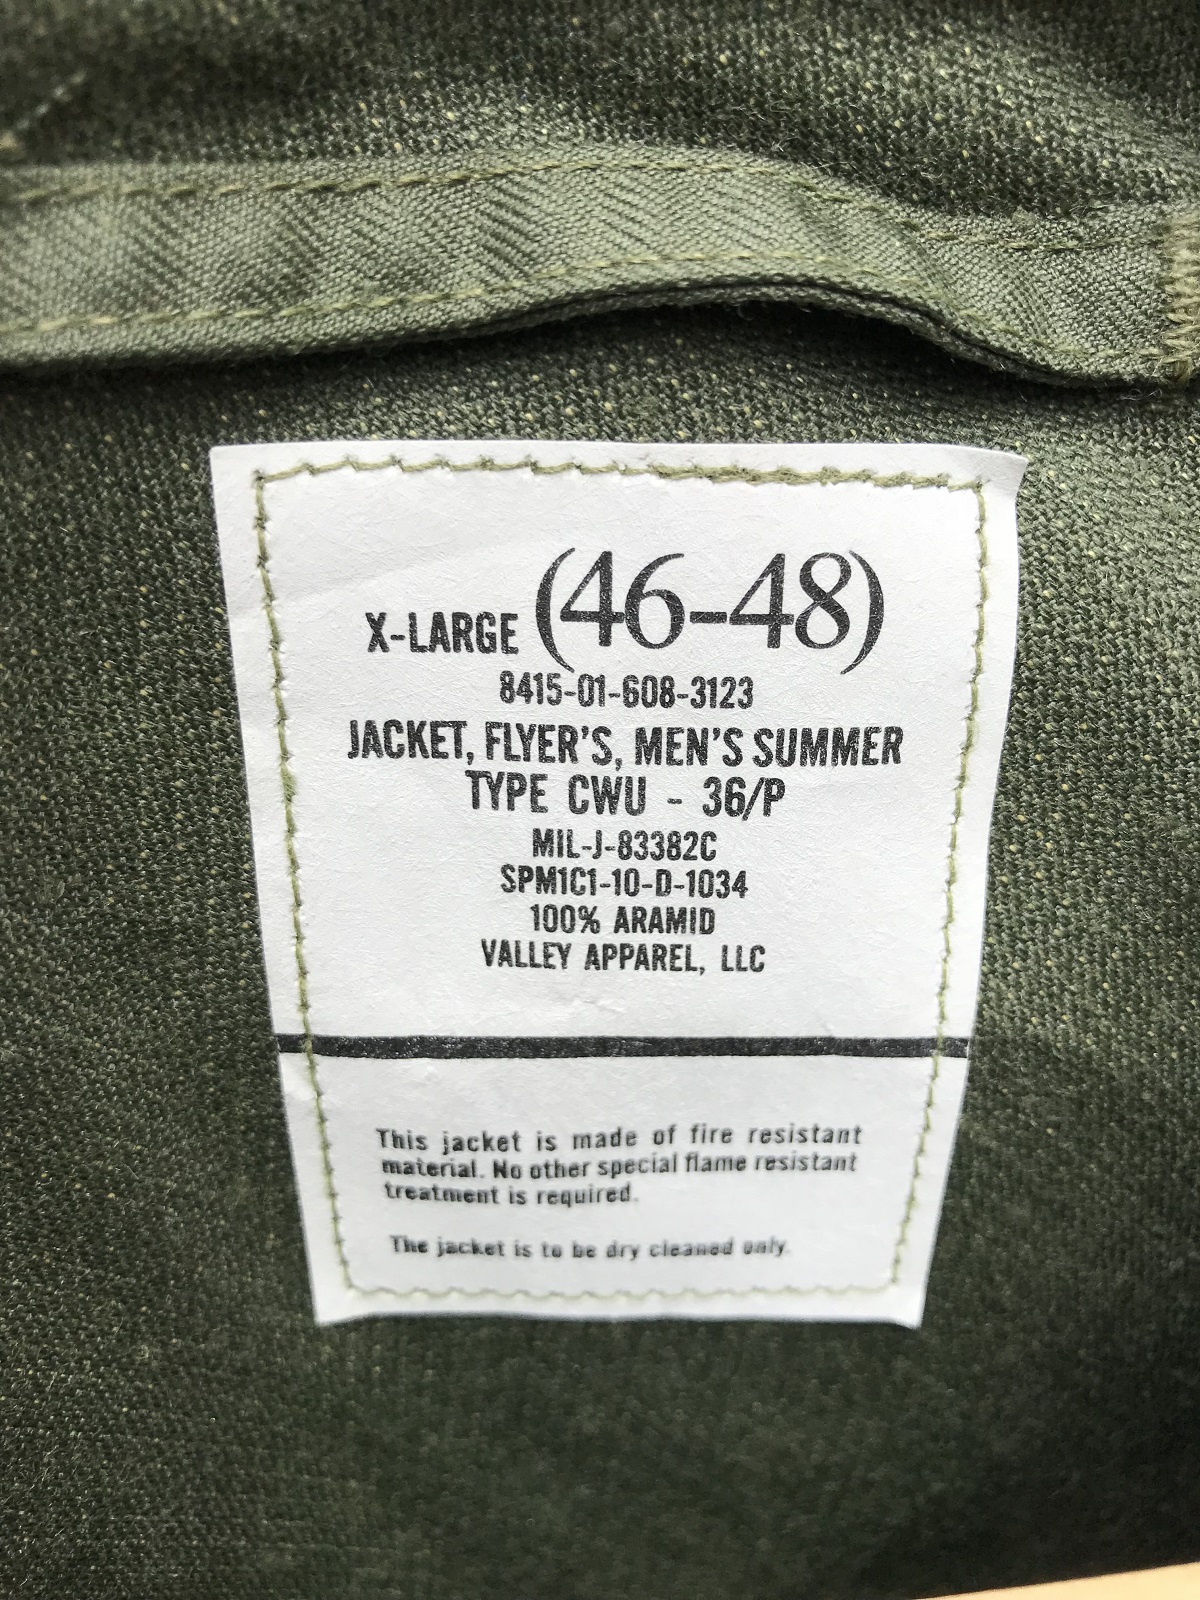 The New type CWU-36/P - a review | Vintage Leather Jackets Forum